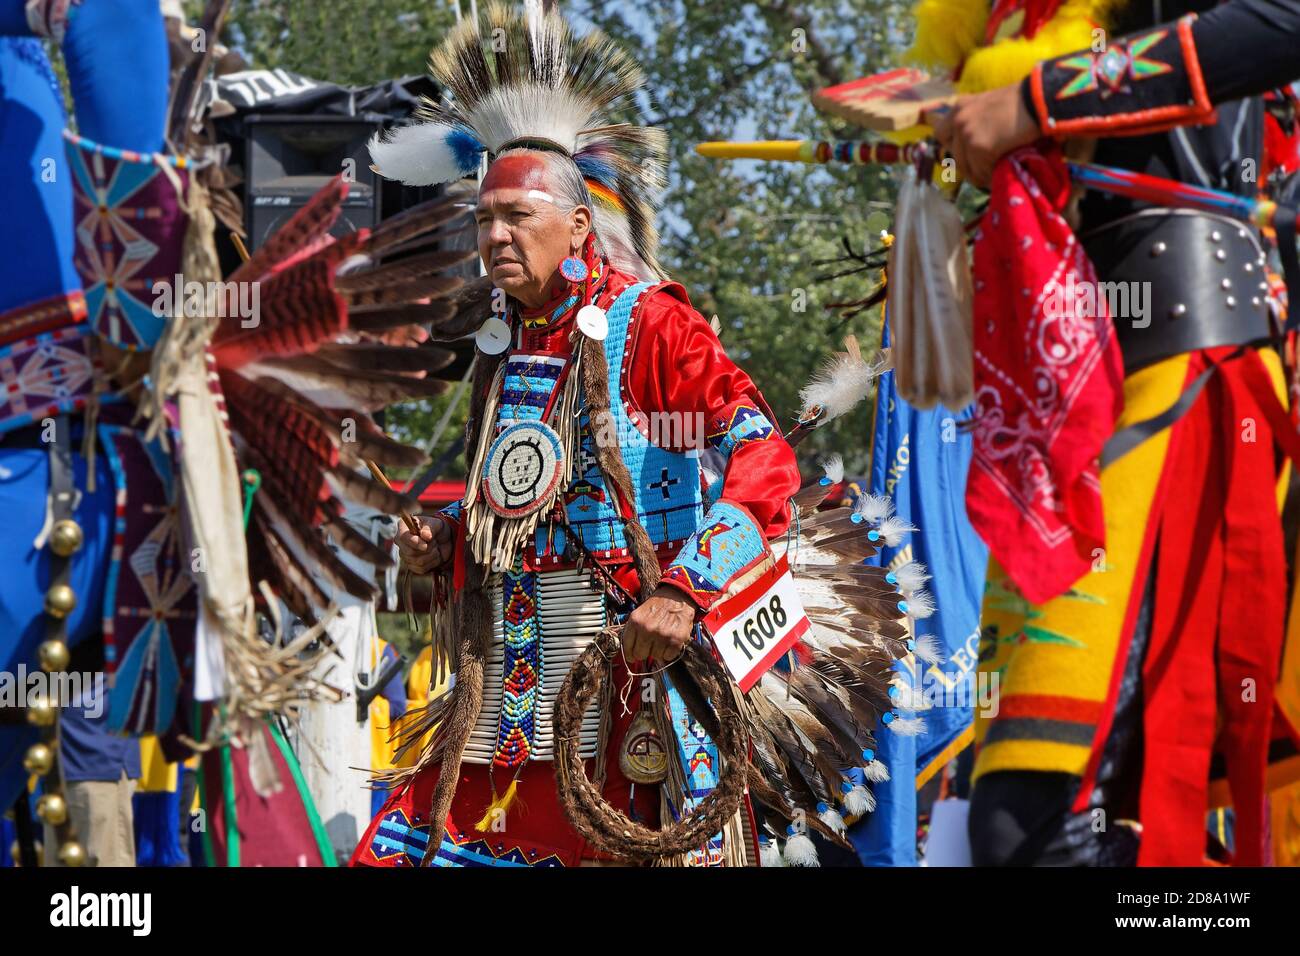 BISMARK, NORTH DAKOTA, September 8, 2018 : A dancer of the 49th annual United Tribes Pow Wow, one large outdoor event that gathers more than 900 dance Stock Photo